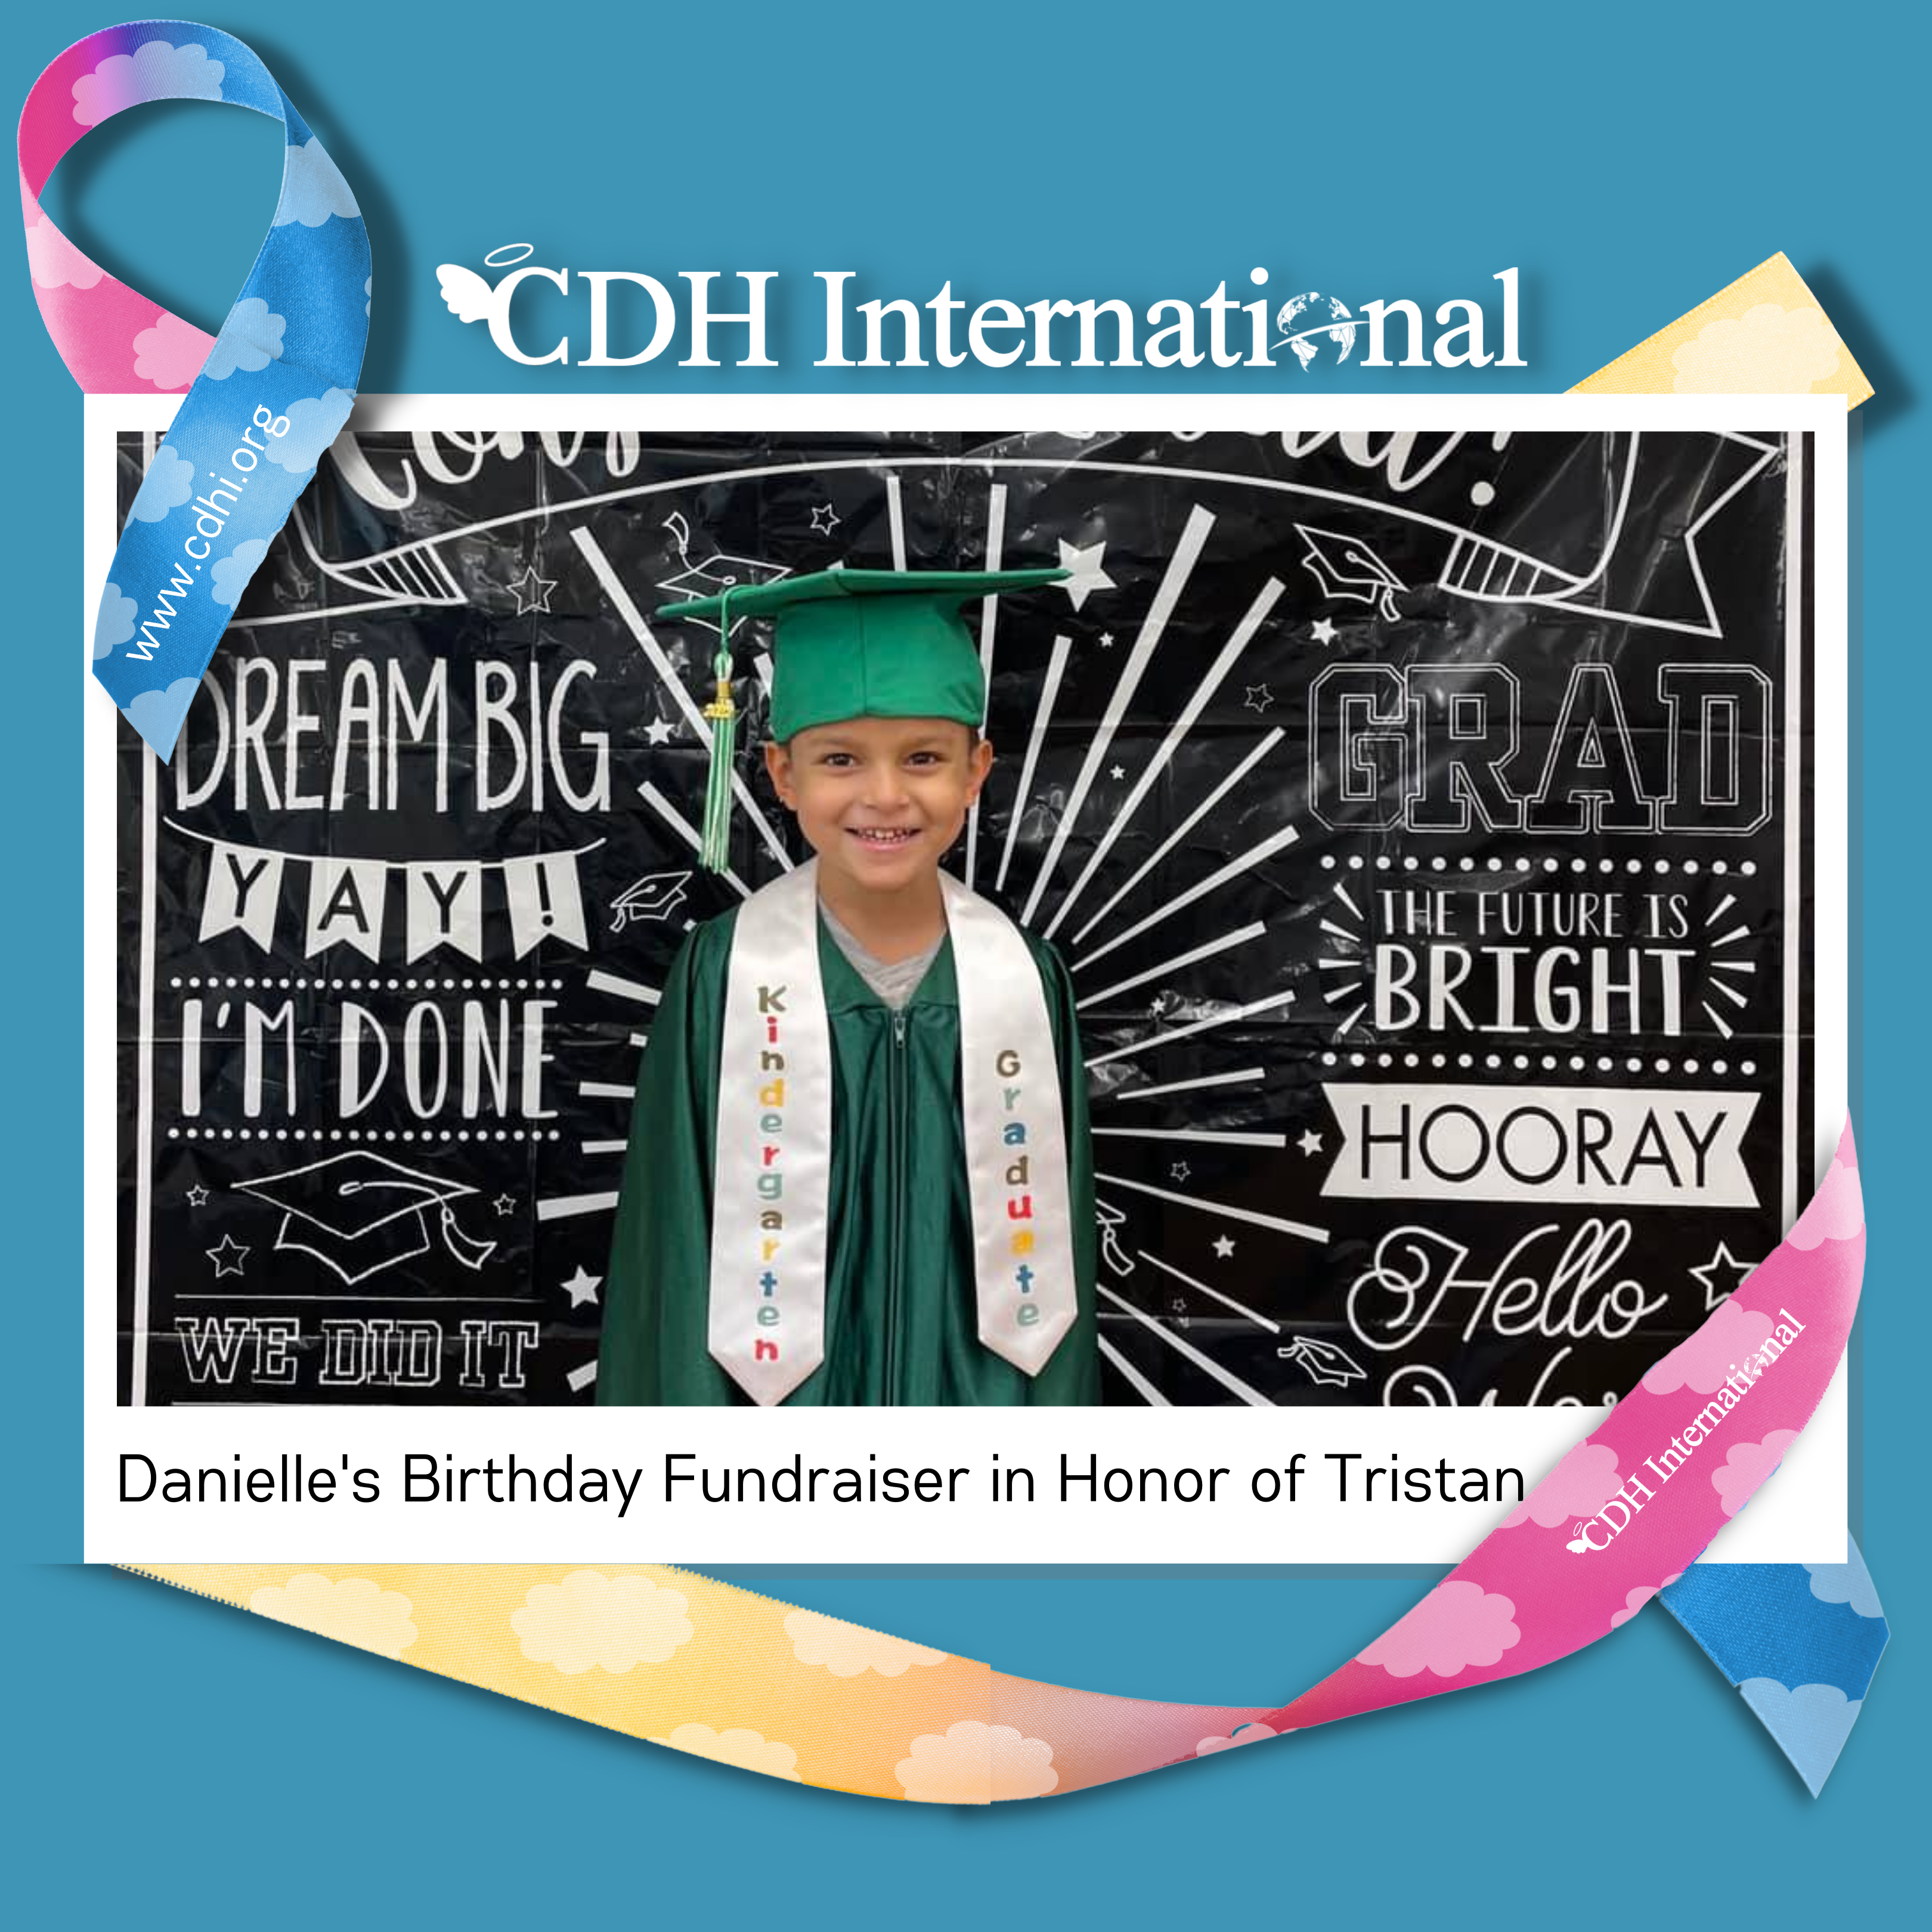 Jeremy’s Birthday Fundraiser for CDHi in Memory of Ethan